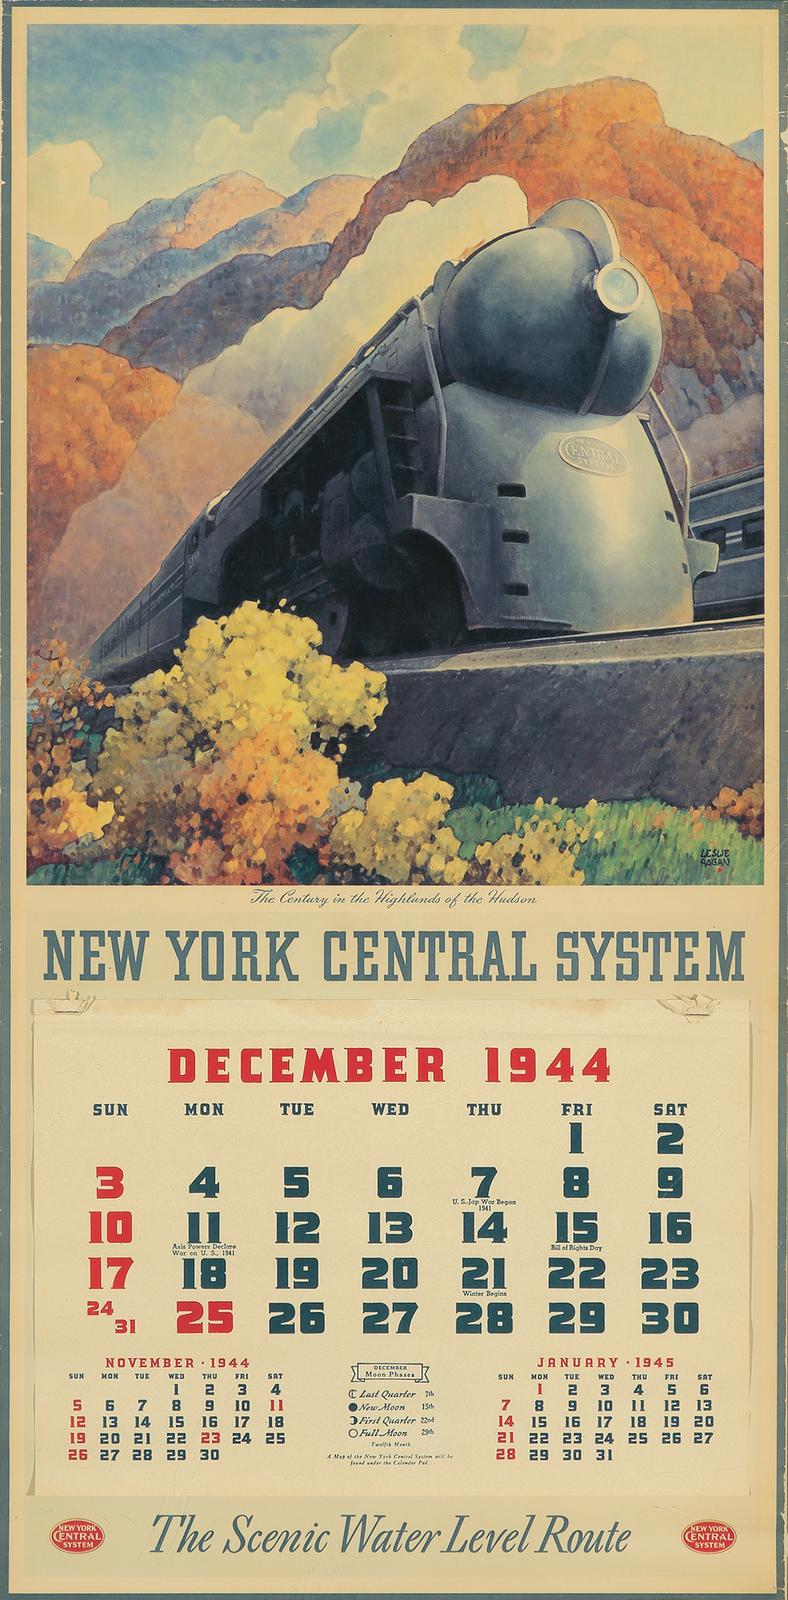 New York Central / Hudson. the Poster International, Auctions in of 1944. The Century | Highlands the